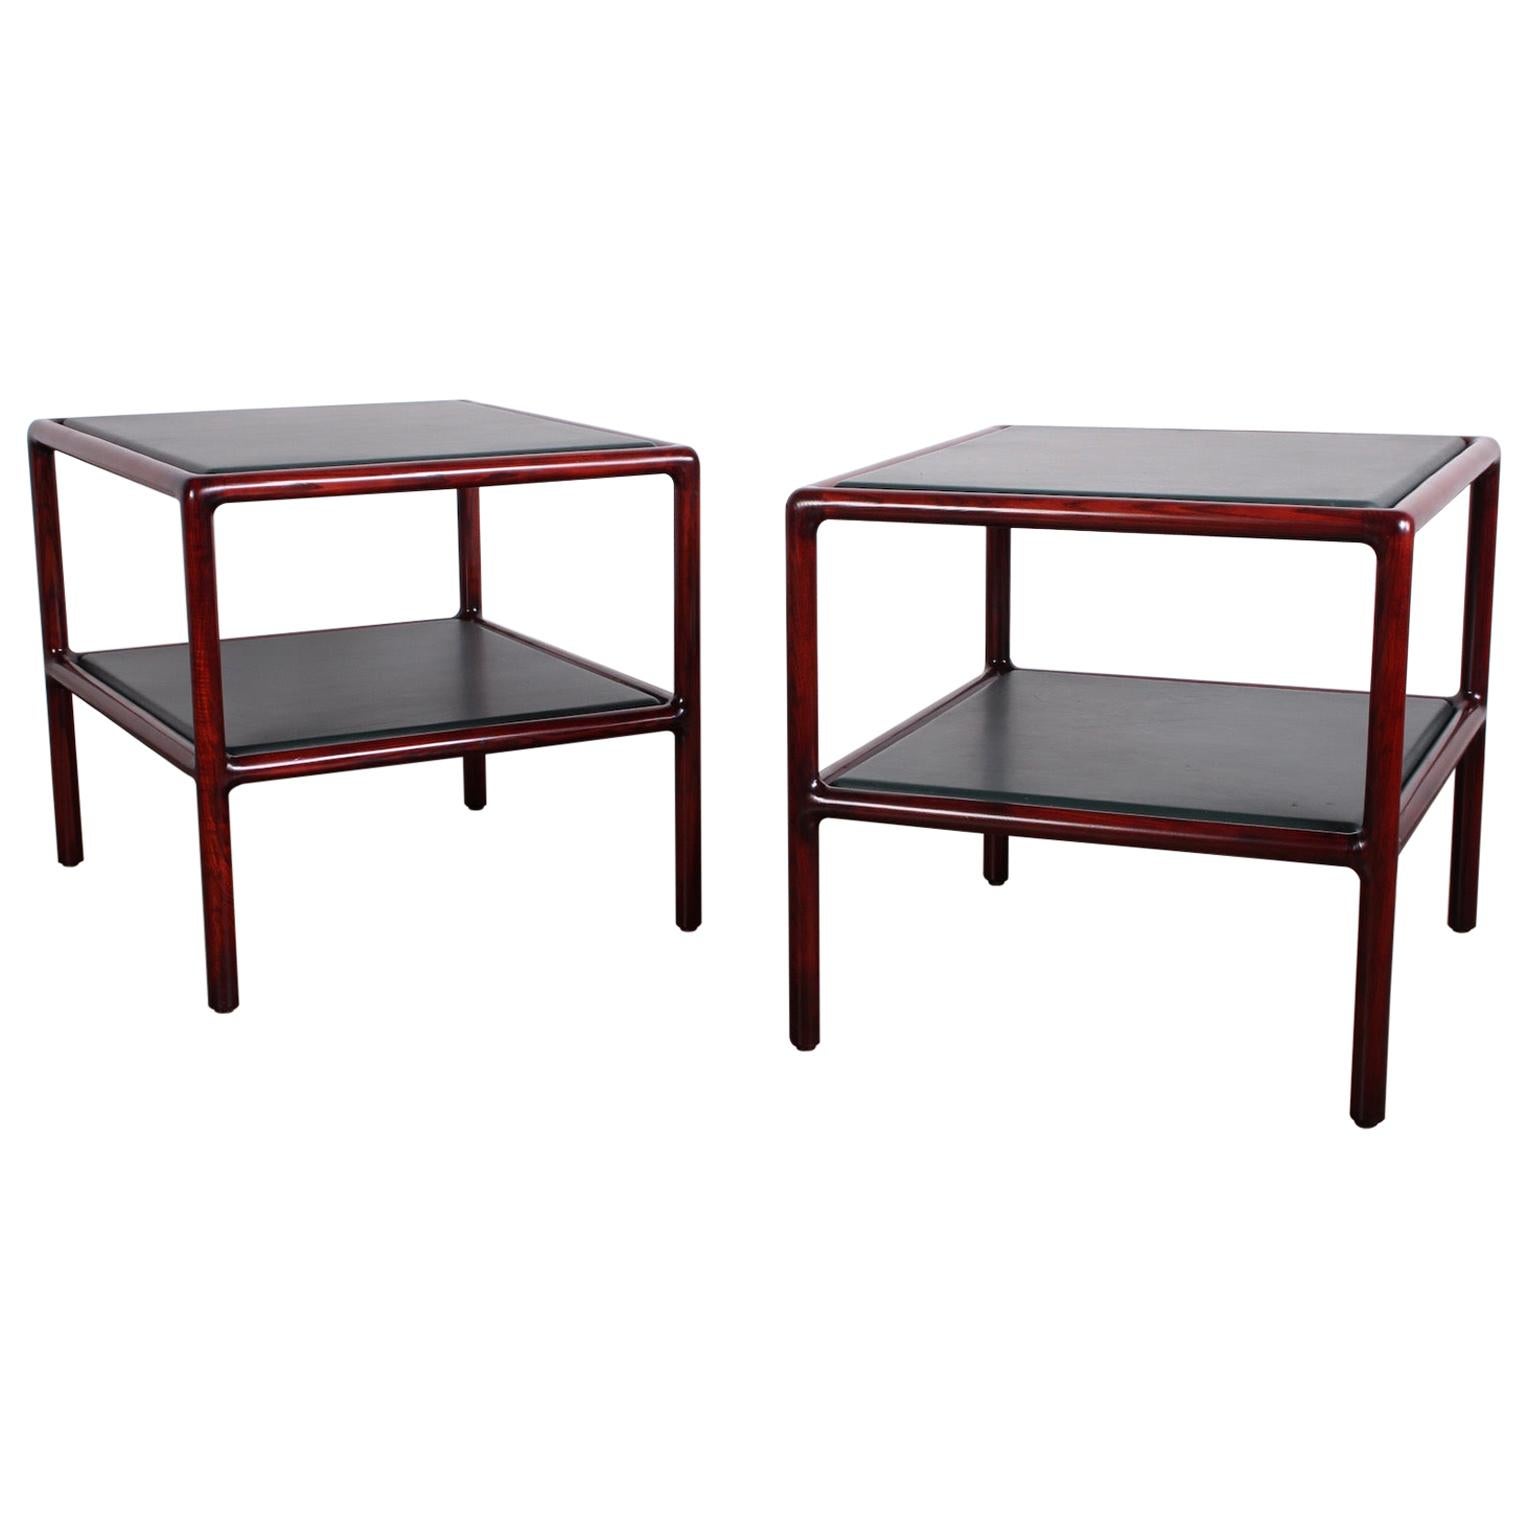 Pair of Ash and Leather Tables by Ward Bennett